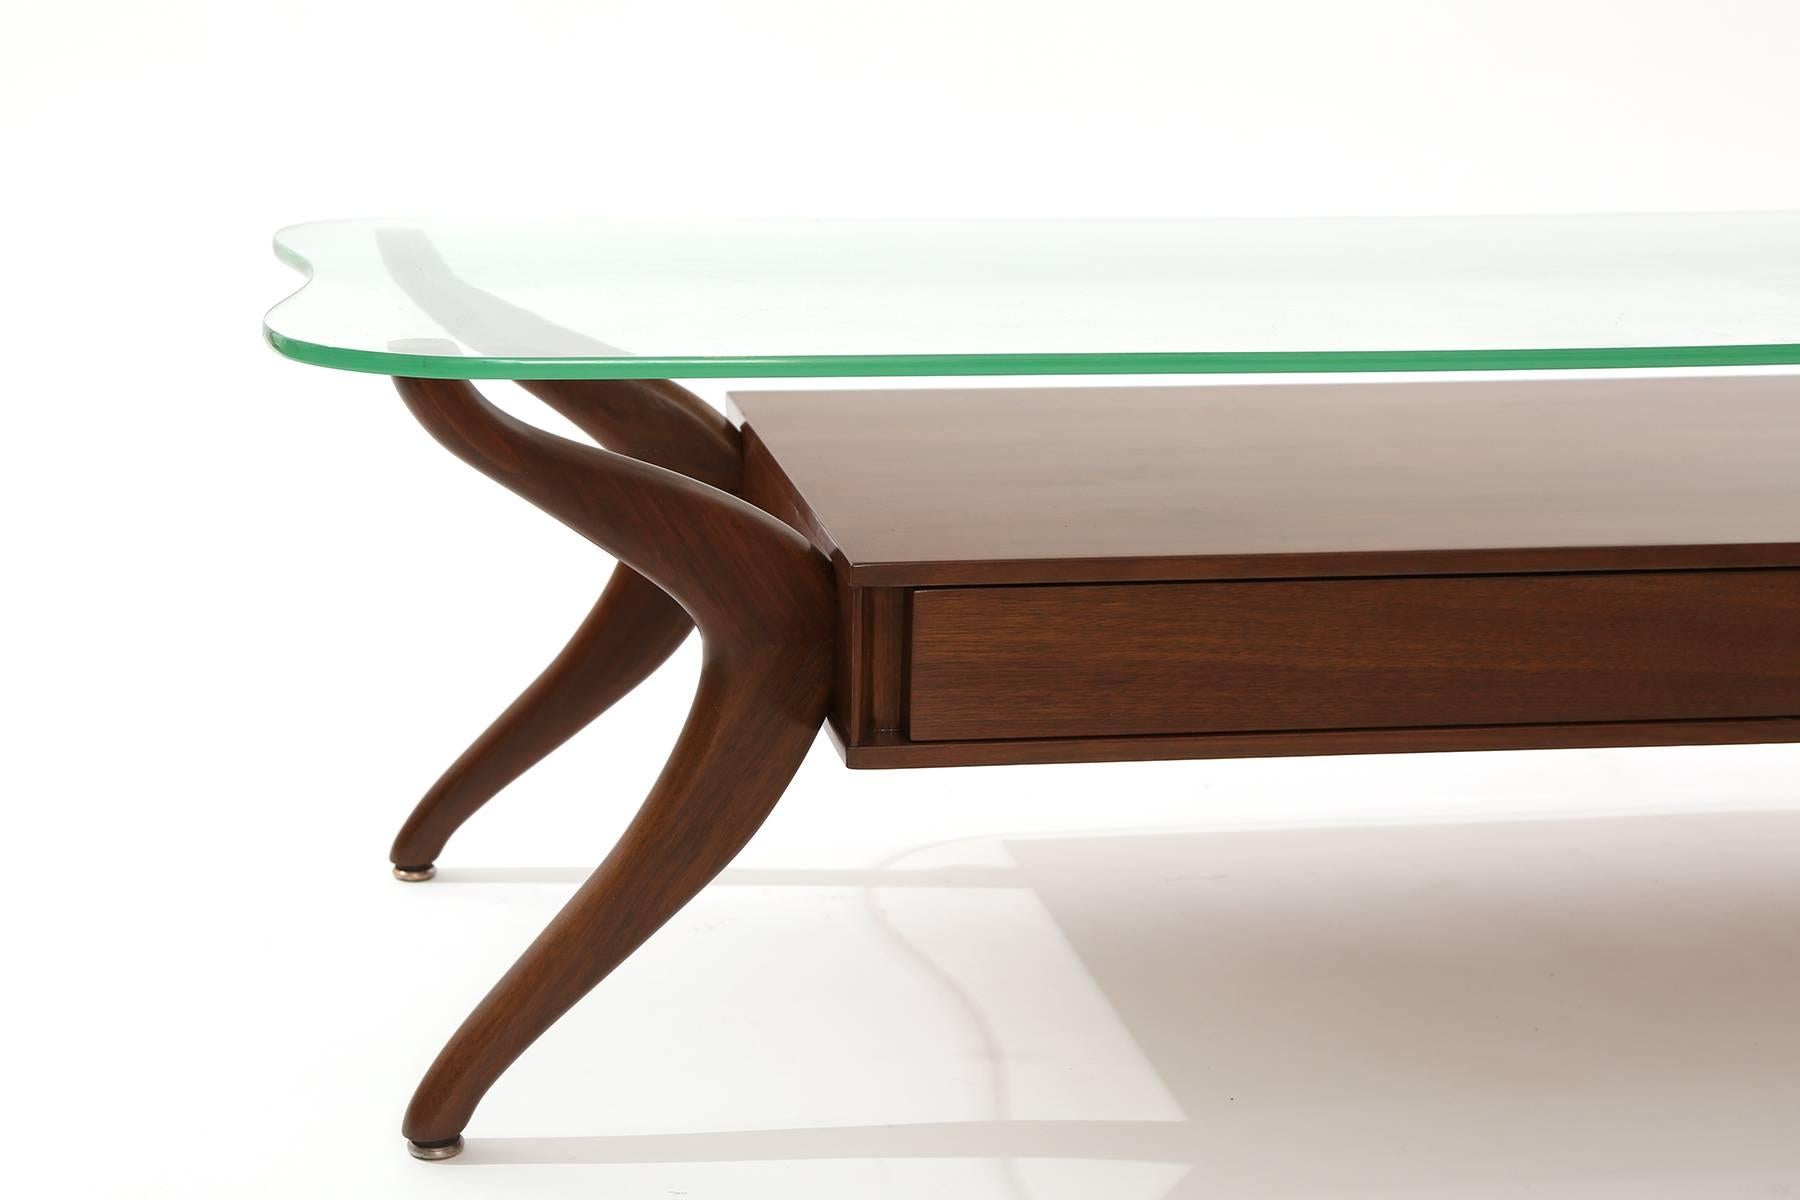 Free-form walnut and glass coffee table circa late 1950s. This example has solid walnut legs, two drawers for storage and free-form original glass top.
Newly finished.